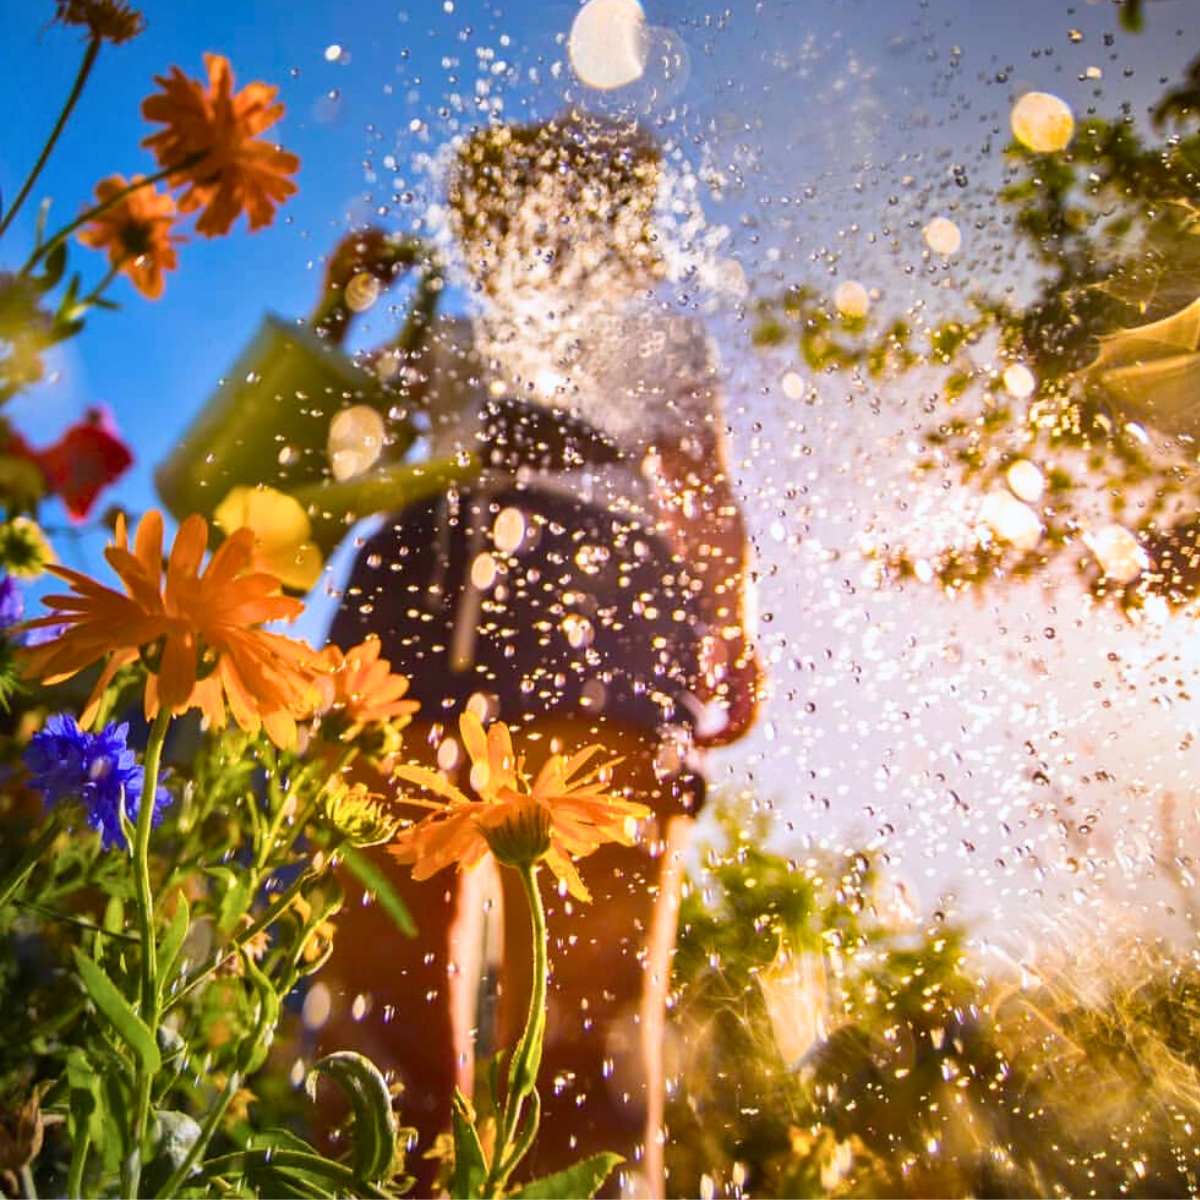 Watering a garden with flowers